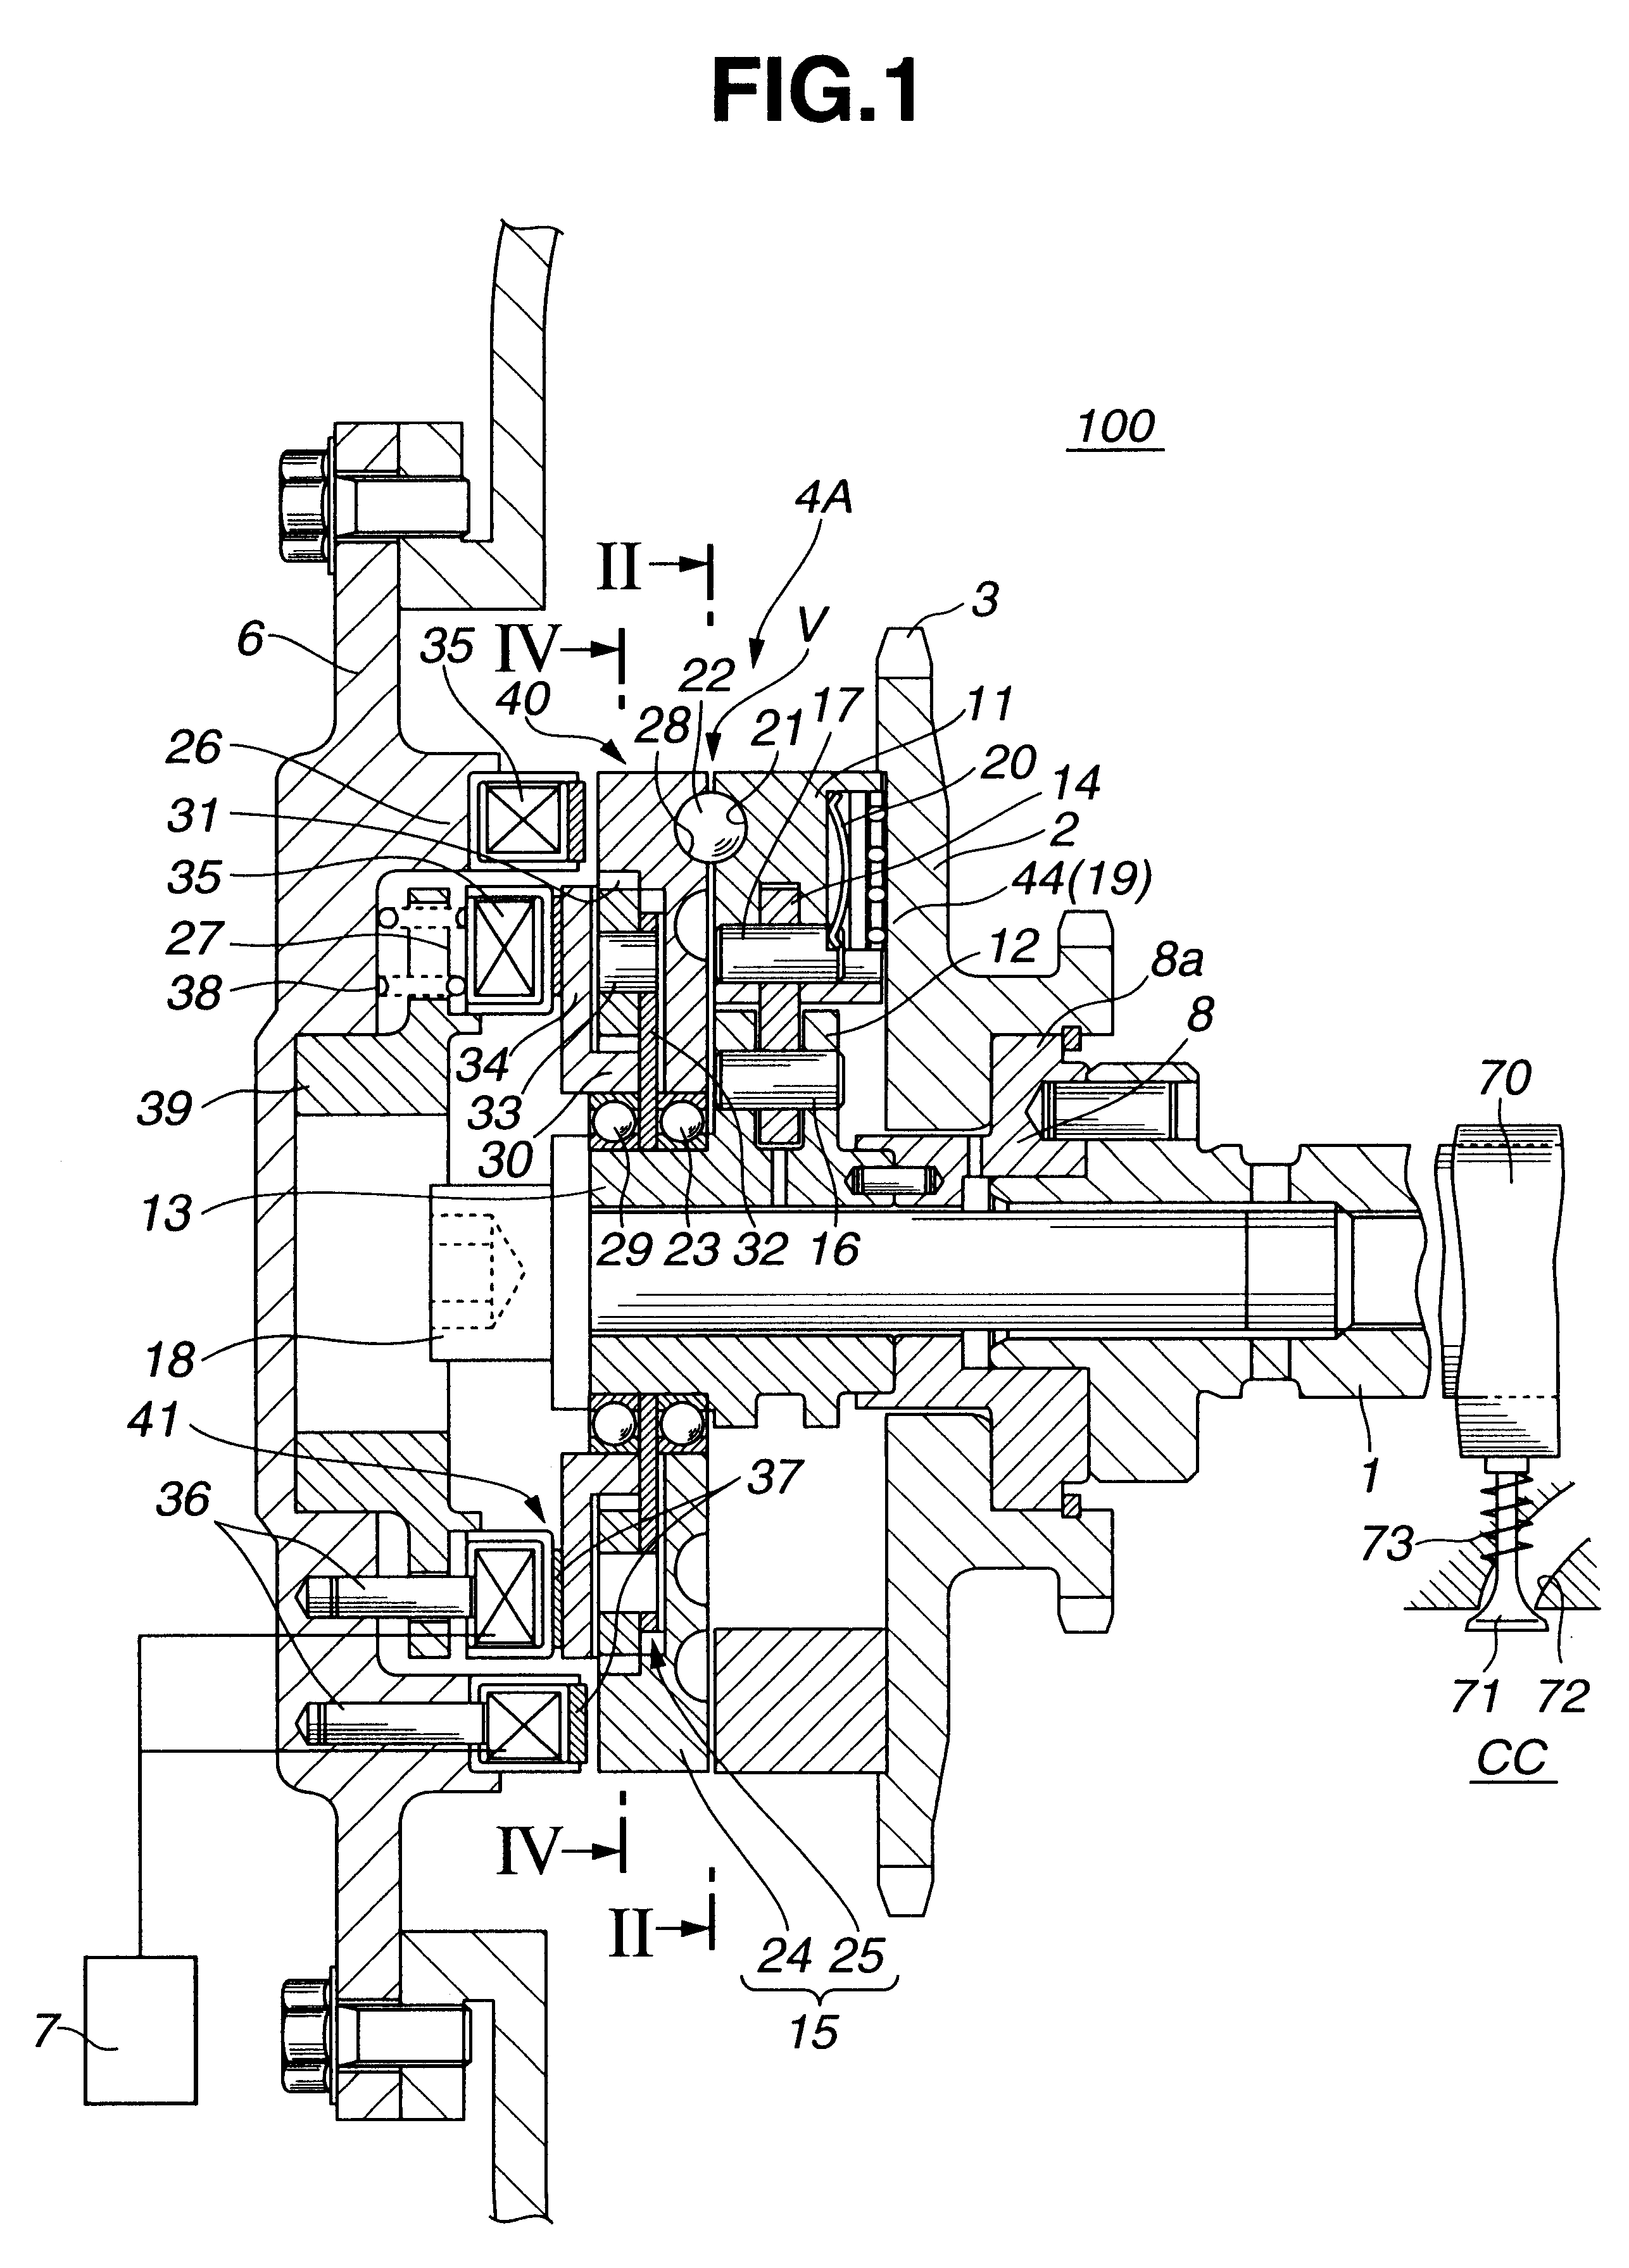 Valve timing control device of internal combustion engine